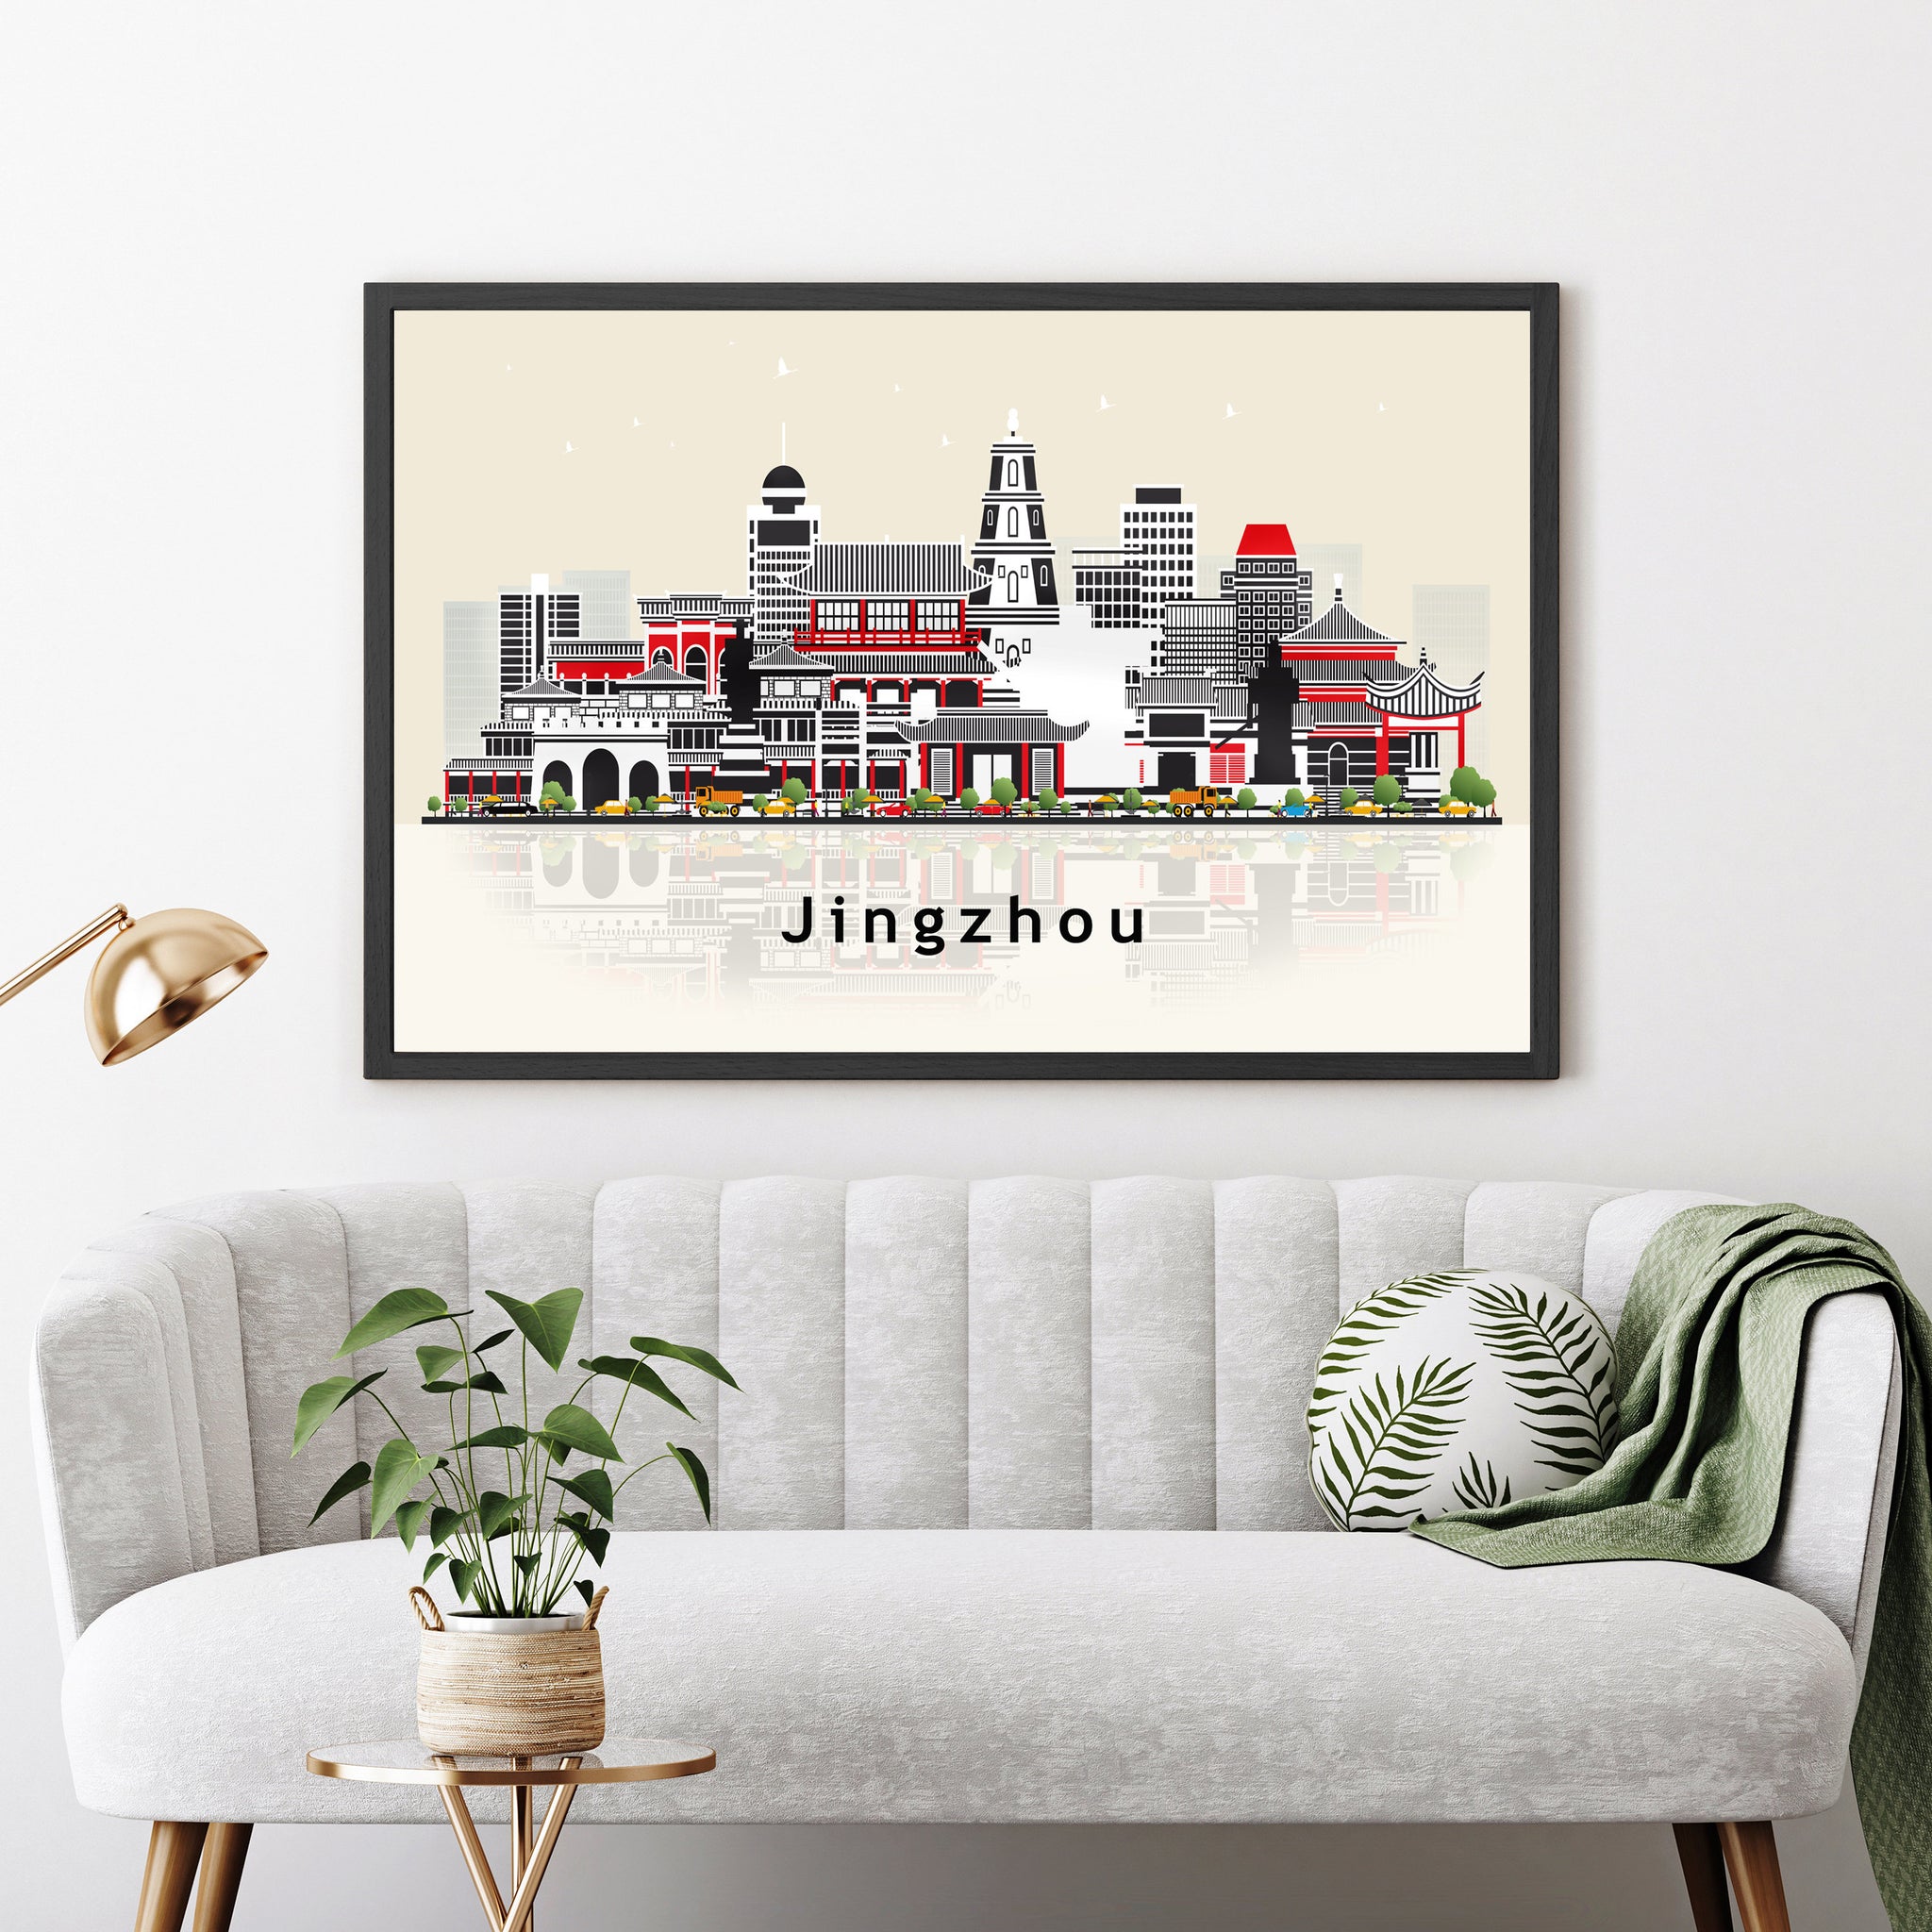 JINGZHOU CHINA Illustration skyline poster, Modern skyline cityscape poster, China city skyline landmark map poster, Home wall decoration